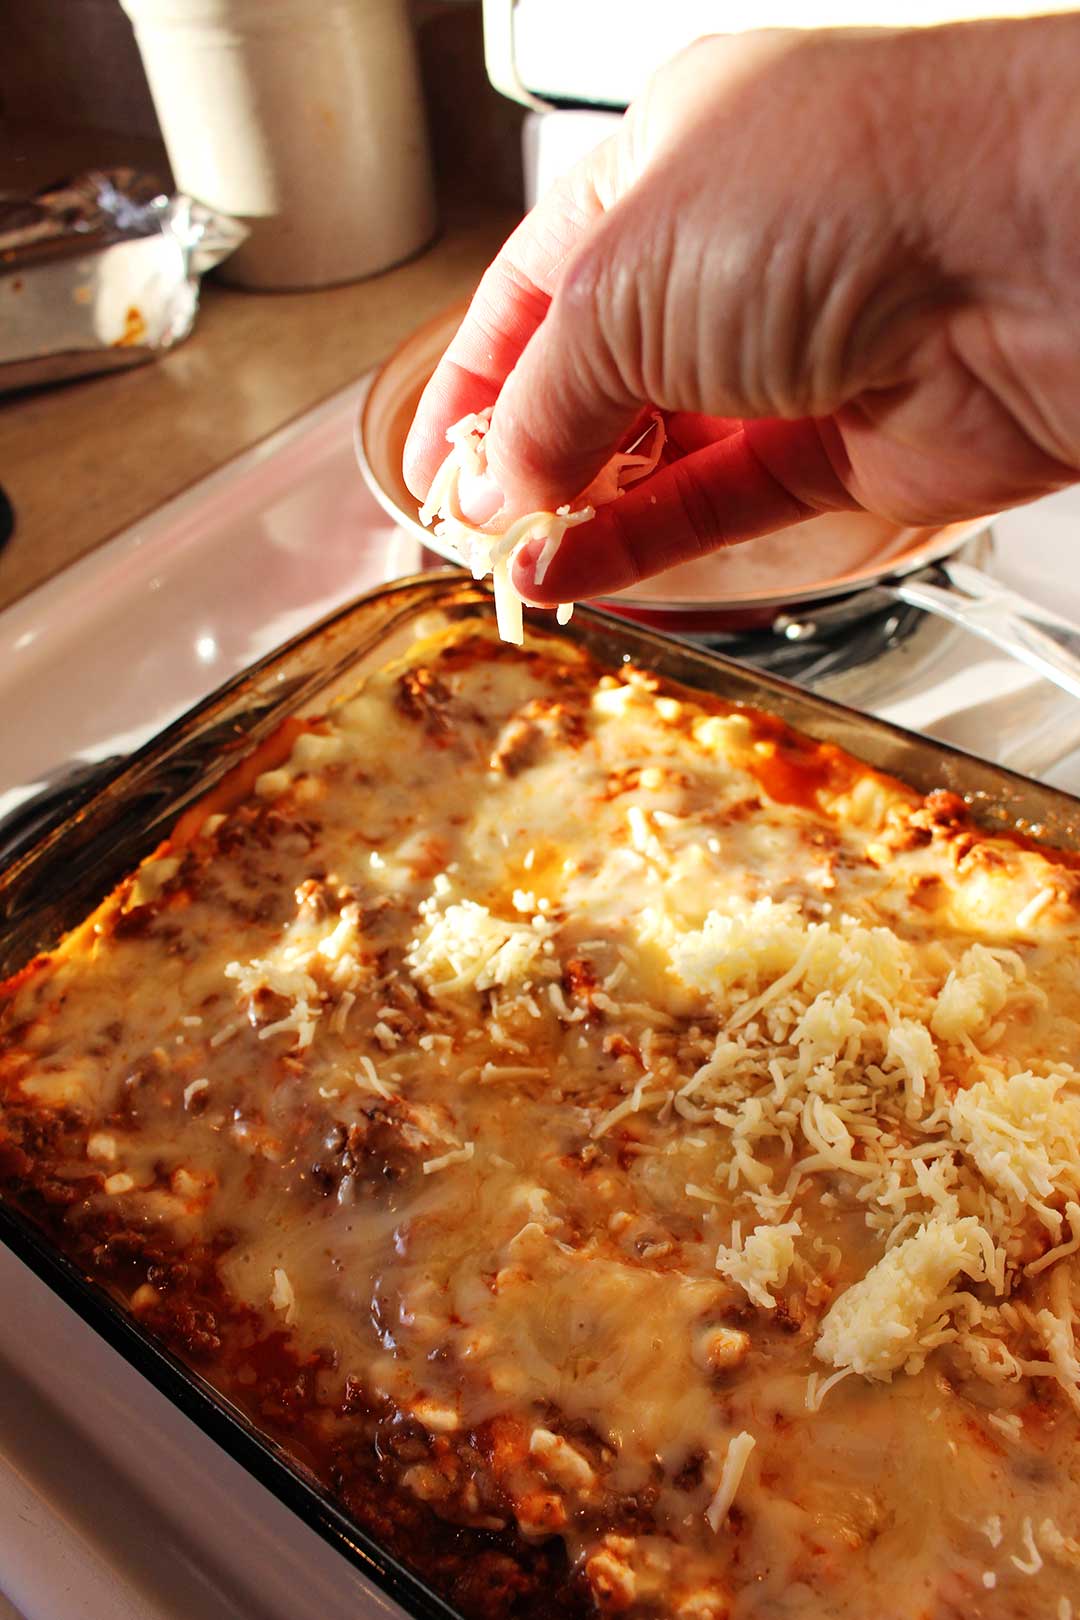 Person sprinkling shredded cheese on an almost finished pan of easy lasagna.